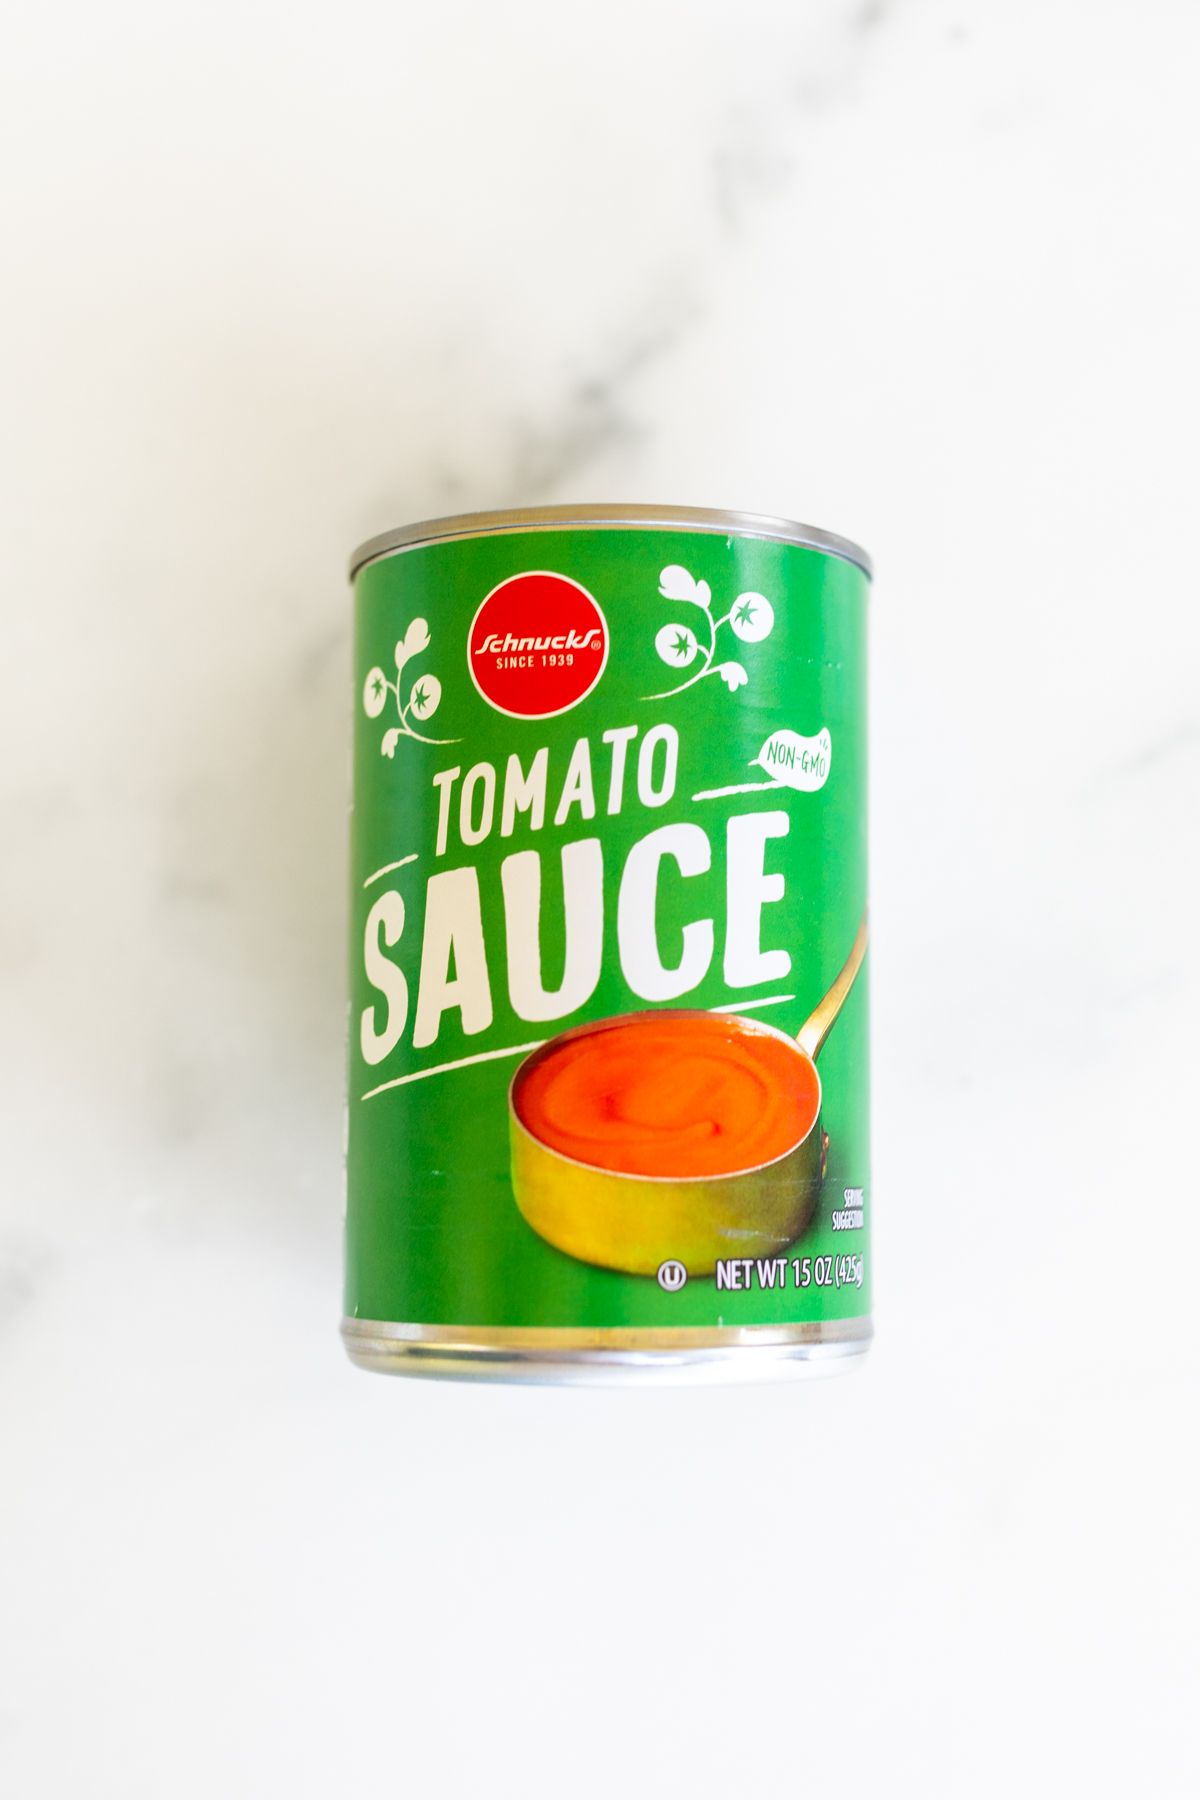 A can of tomato sauce on a marble countertop.